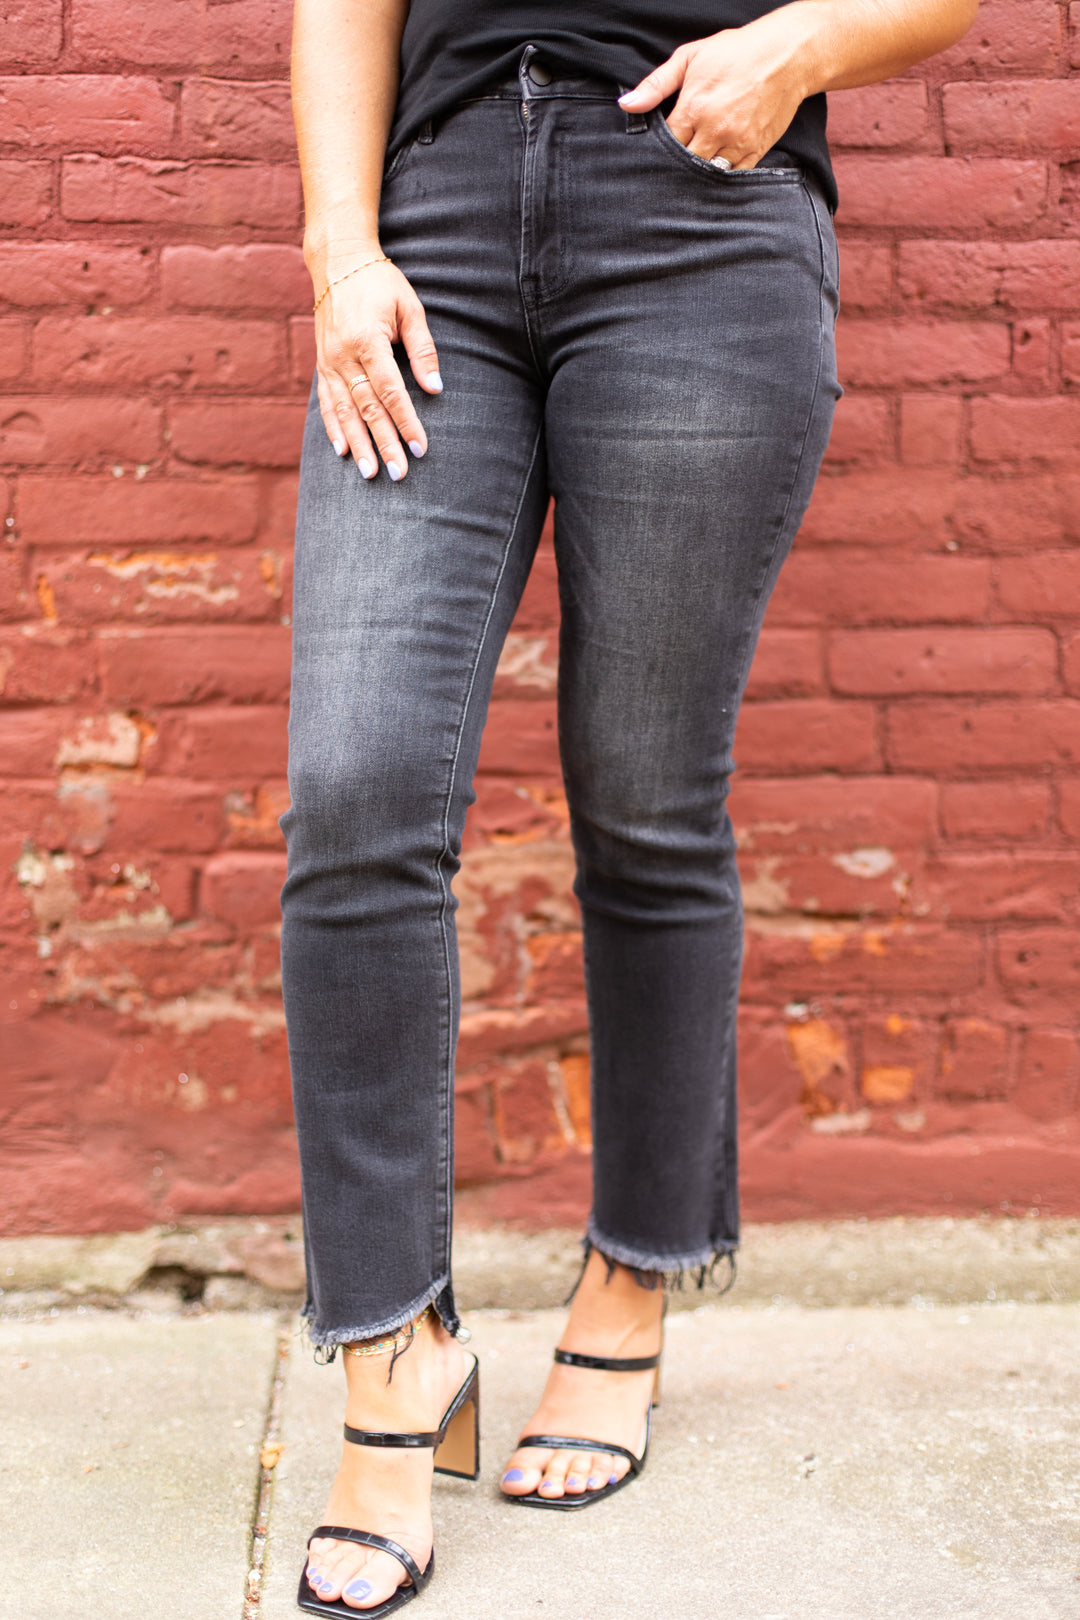 How To Wear Boyfriend Jeans - The Mom Edit - Page 262